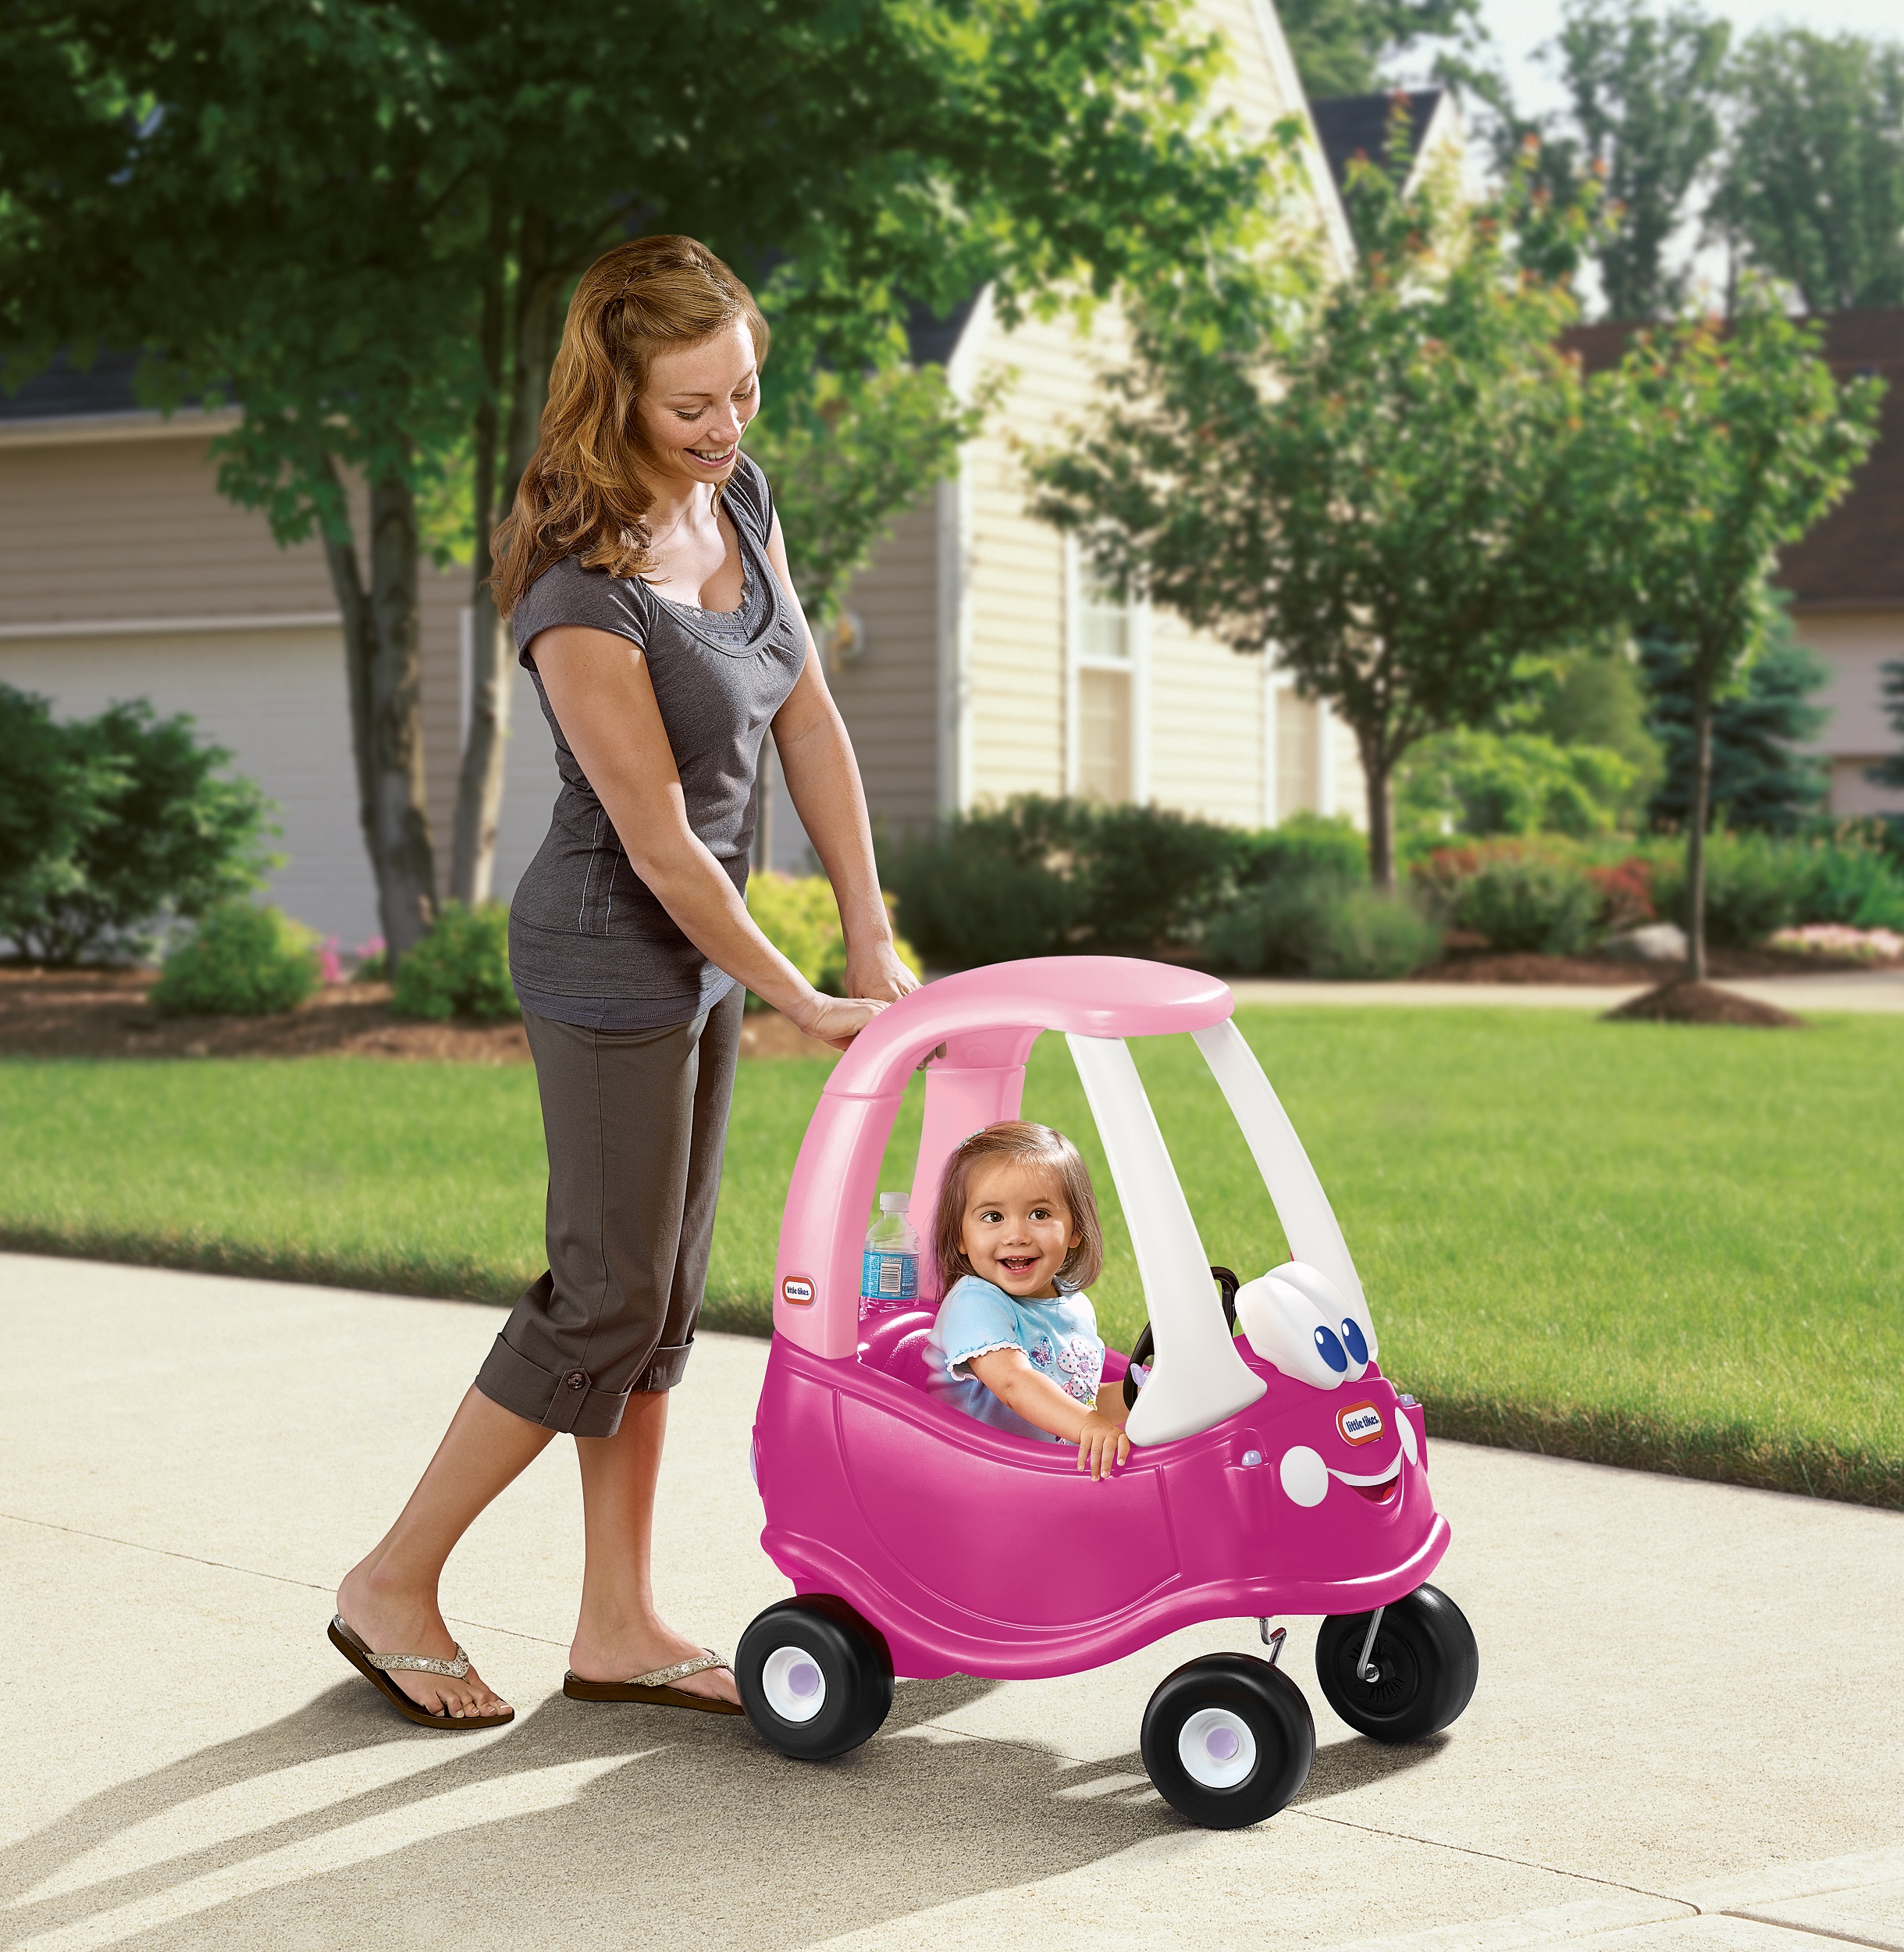 Little Tikes Princess Cozy Coupe (Magenta) For Girls and Boys Ages 1 Year + - image 5 of 10